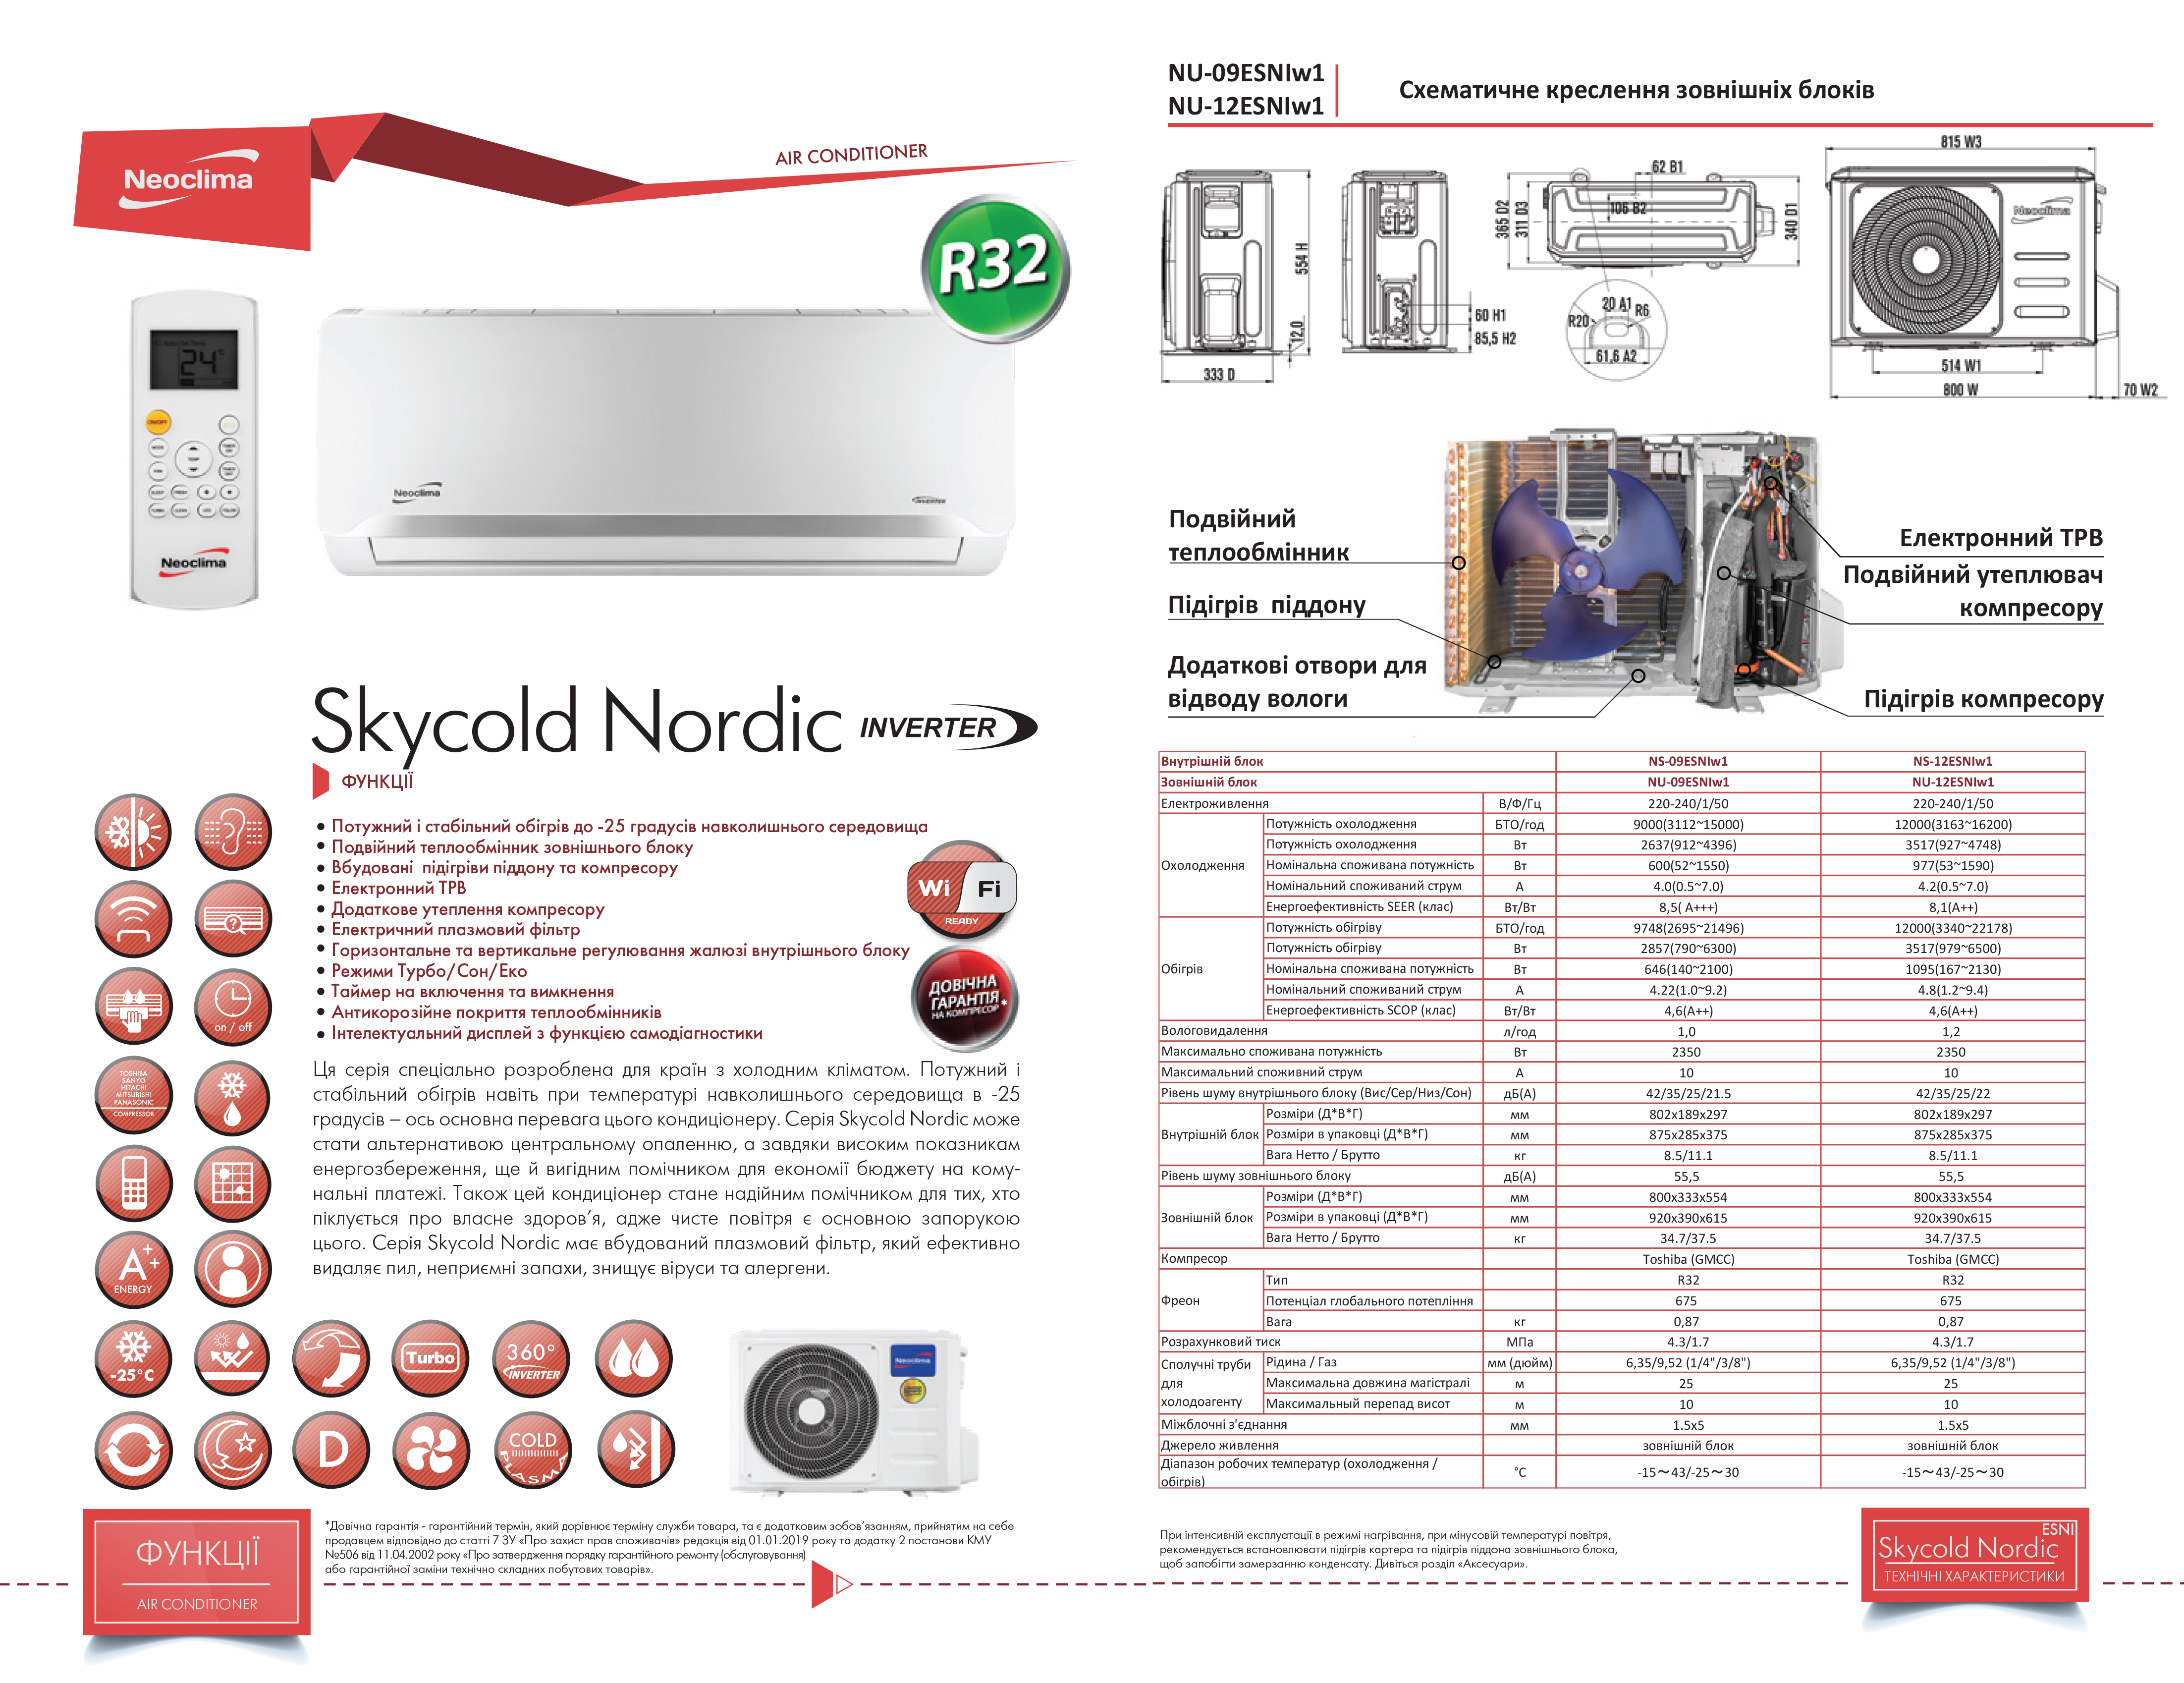 Neoclima Skycold Nordic NS/NU-09ESNIw1 Характеристики